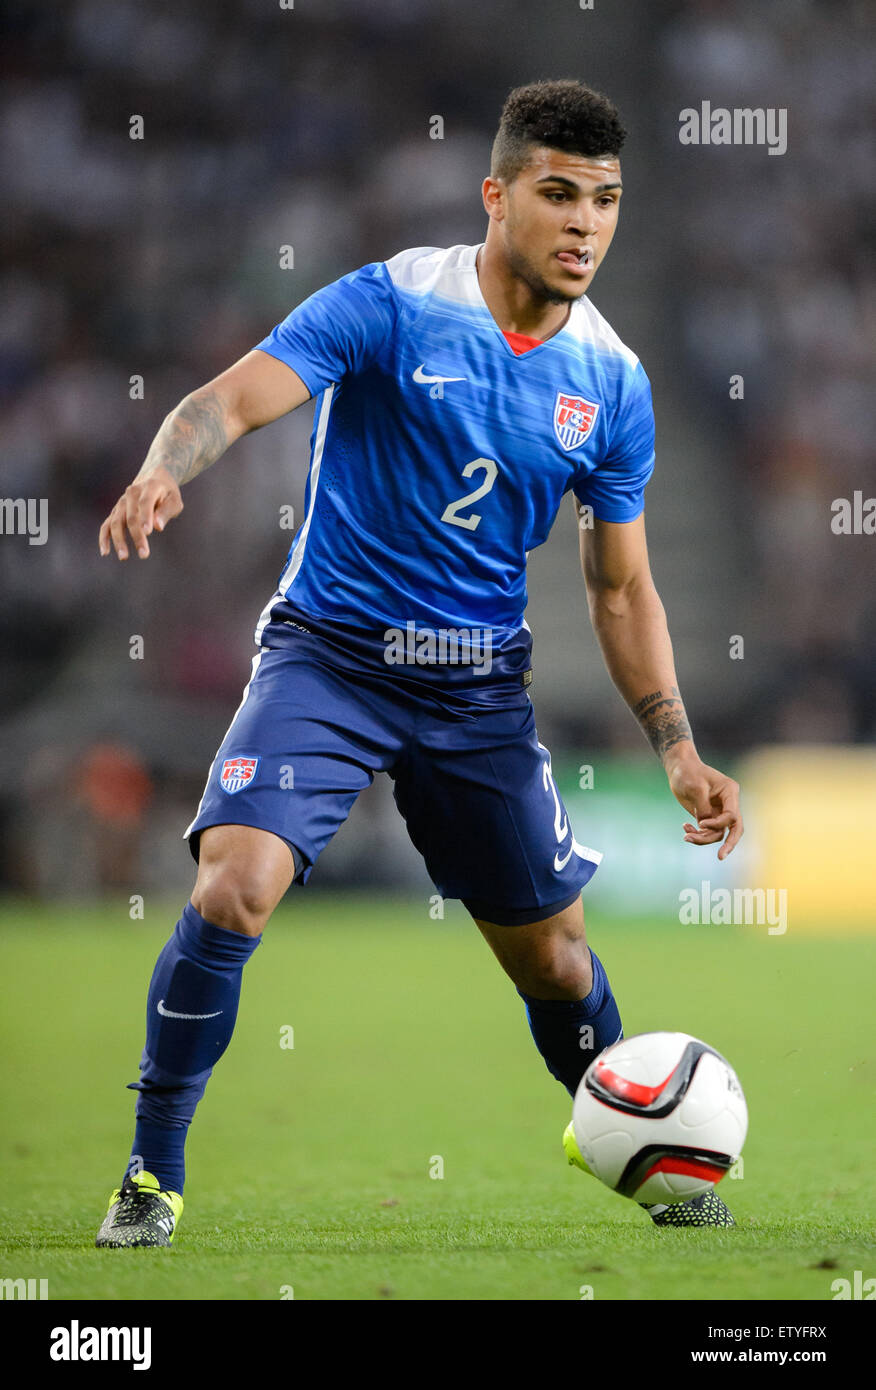 Cologne, Germany. 10th June, 2015. DeAndre Yedlin of the USA in action during the international friendly soccer match between Germany and the USA at RheinEnergieStadion in Cologne, Germany, 10 June 2015. The USA won the match 2-1. Photo: Thomas Eisenhuth/dpa - NO WIRE SERVICE -/dpa/Alamy Live News Stock Photo